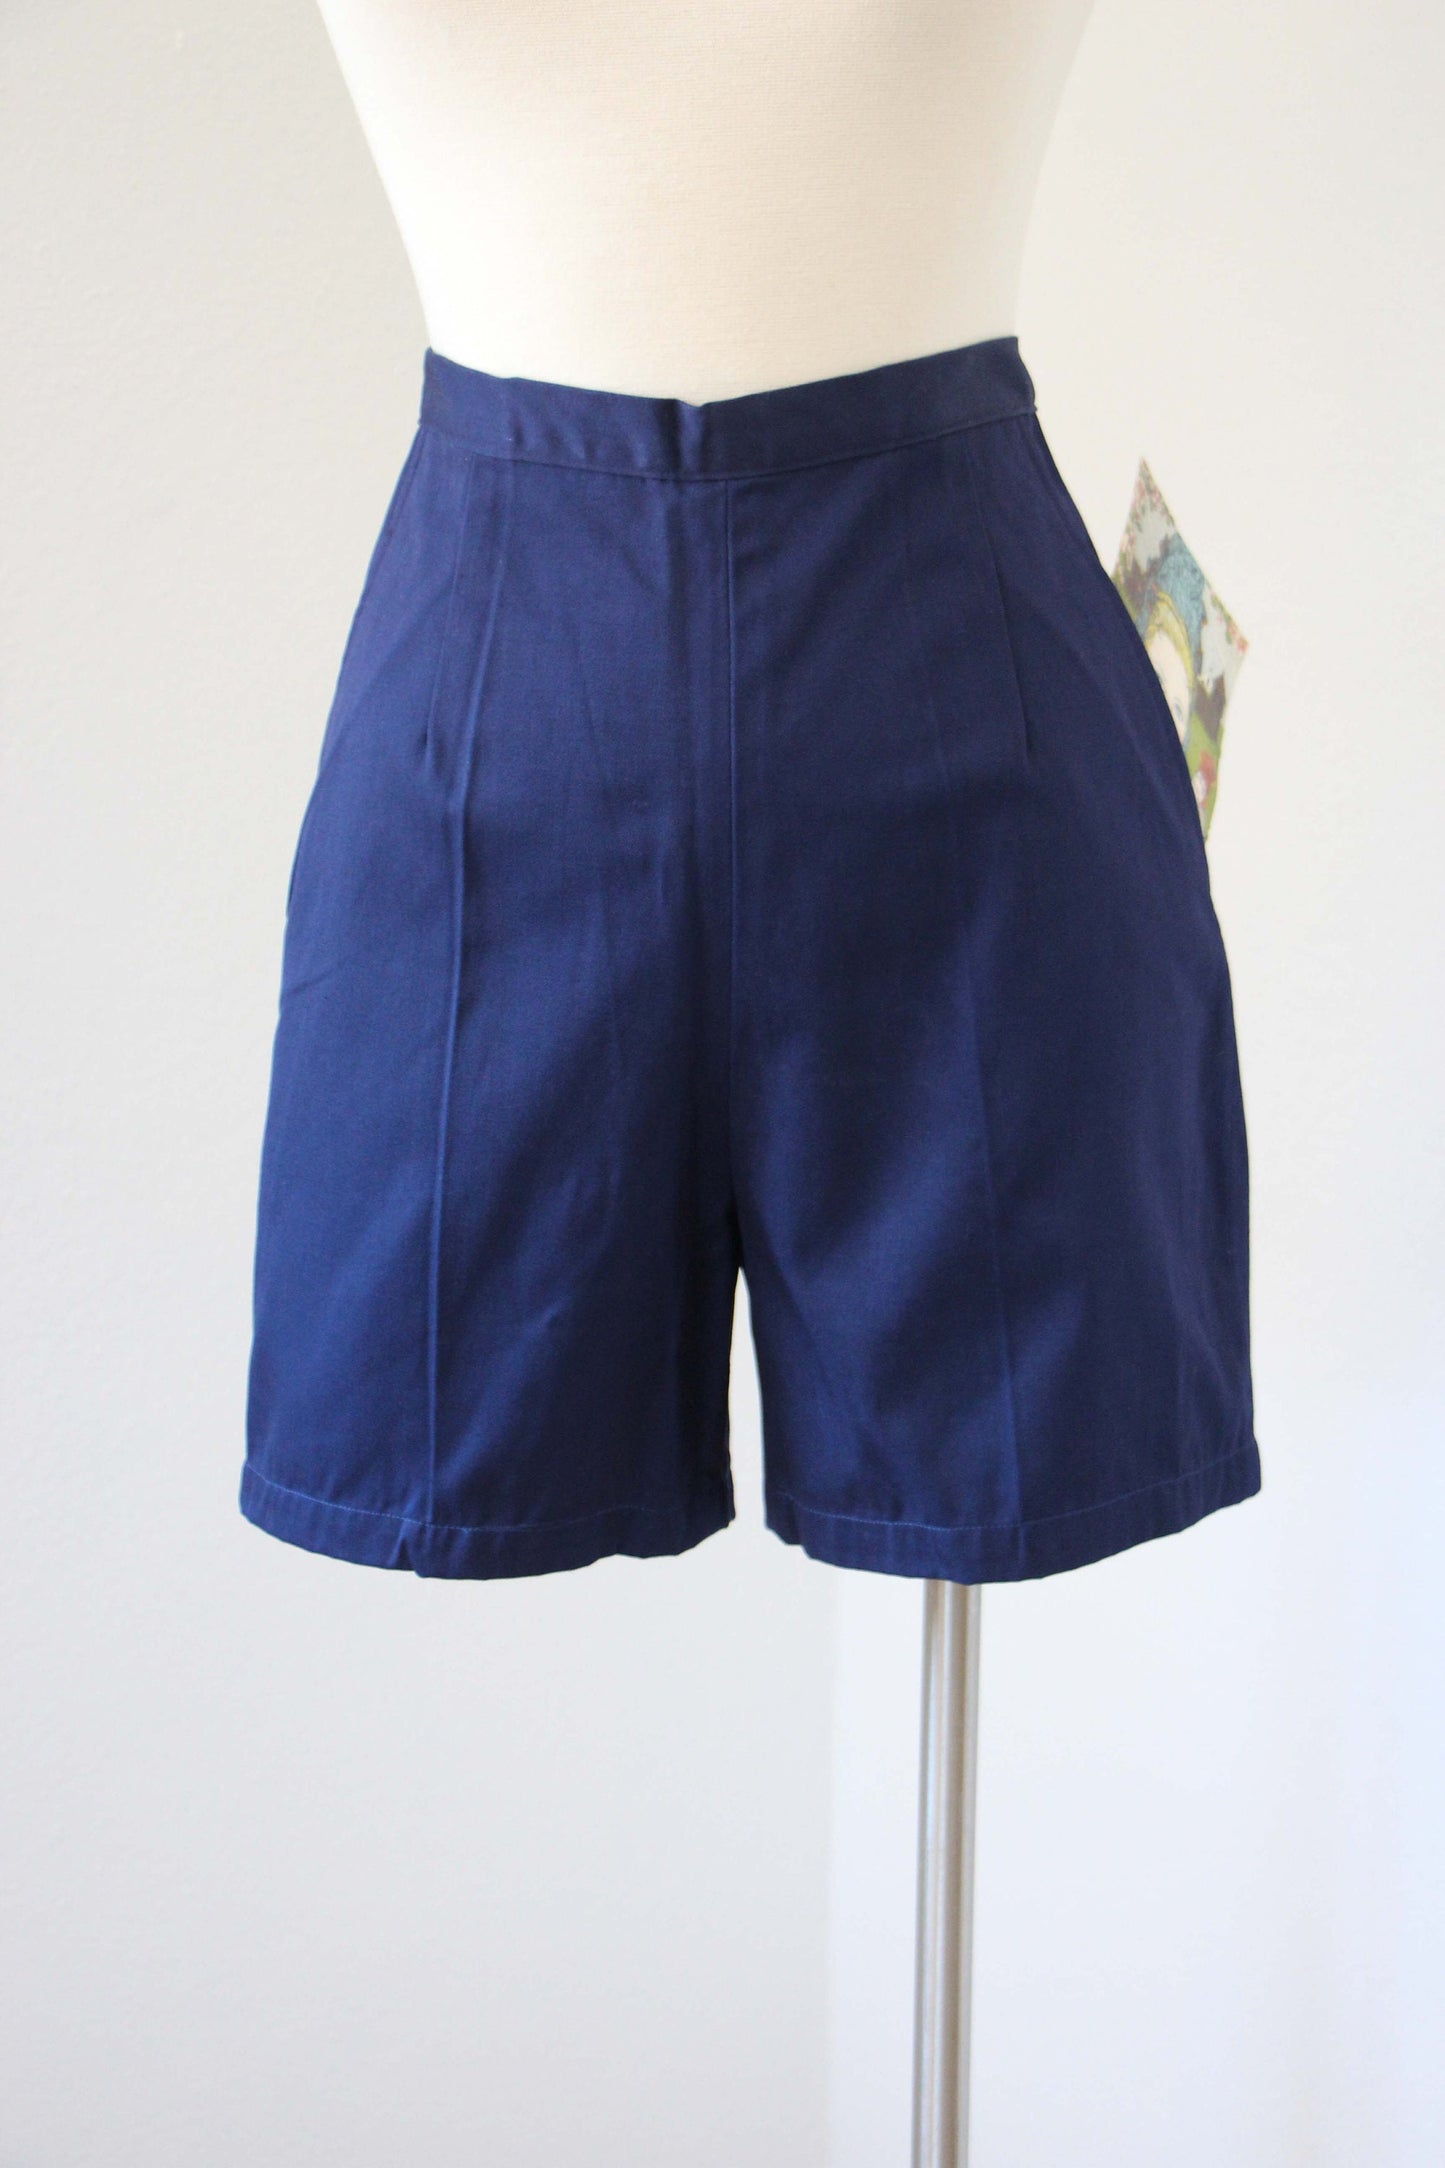 Vintage 1960s Gym Shorts - Deadstock Moonrise Kingdom Sporty Rear Zip Cotton Blend Twill w Pockets - Choose Your Pair!